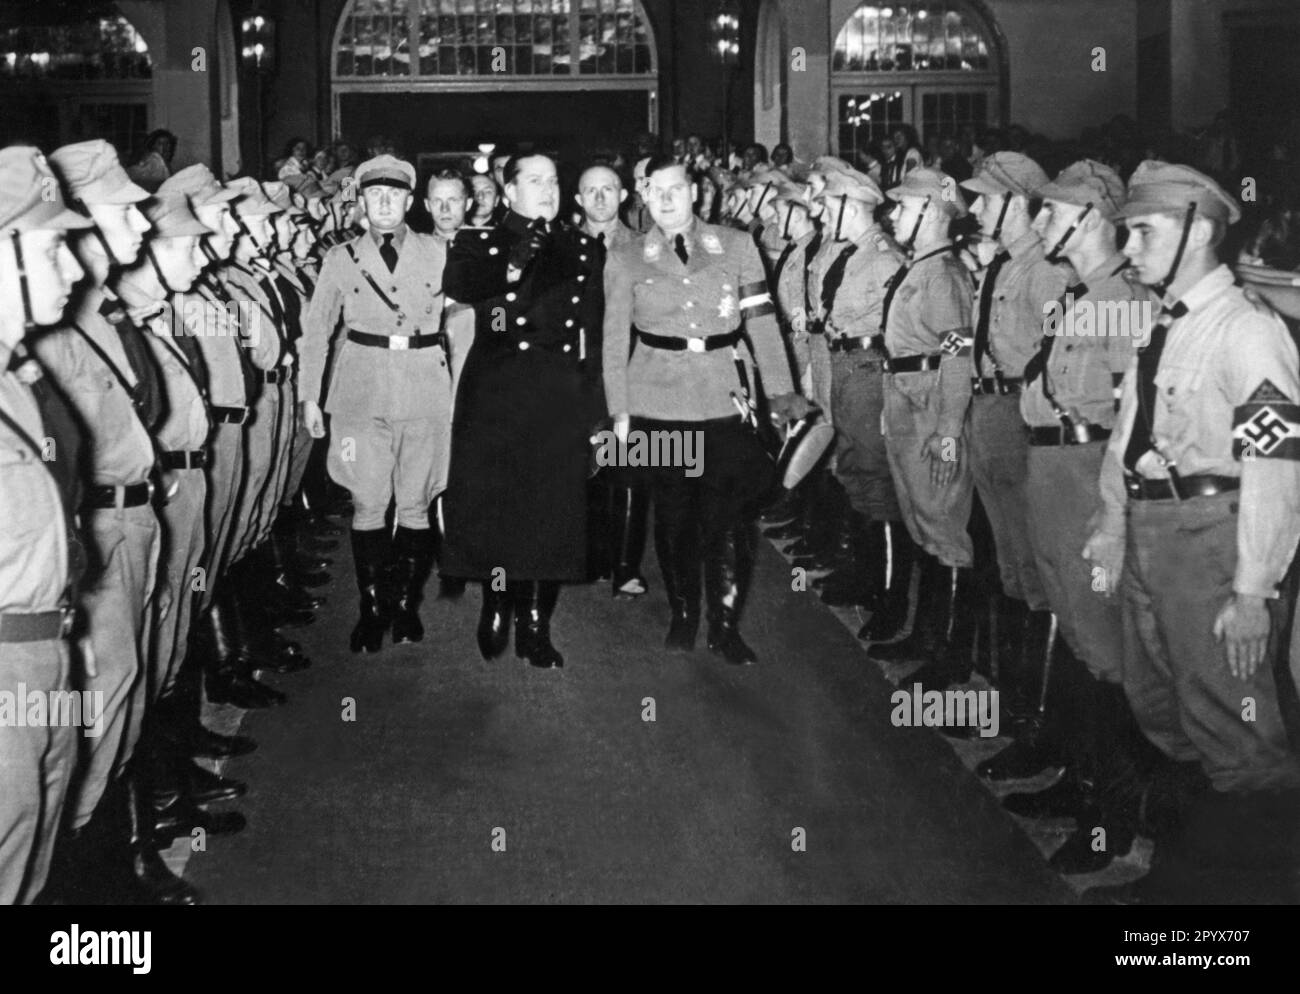 Baldur Benedikt von Schirach at a rally of the Hitler Youth in the Berlin Sports Palace. Obergebietsführer Arthur Axmann, Count Galeazzo Ciano and Baldur Benedikt von Schirach (from left). Undated photograph. [automated translation] Stock Photo